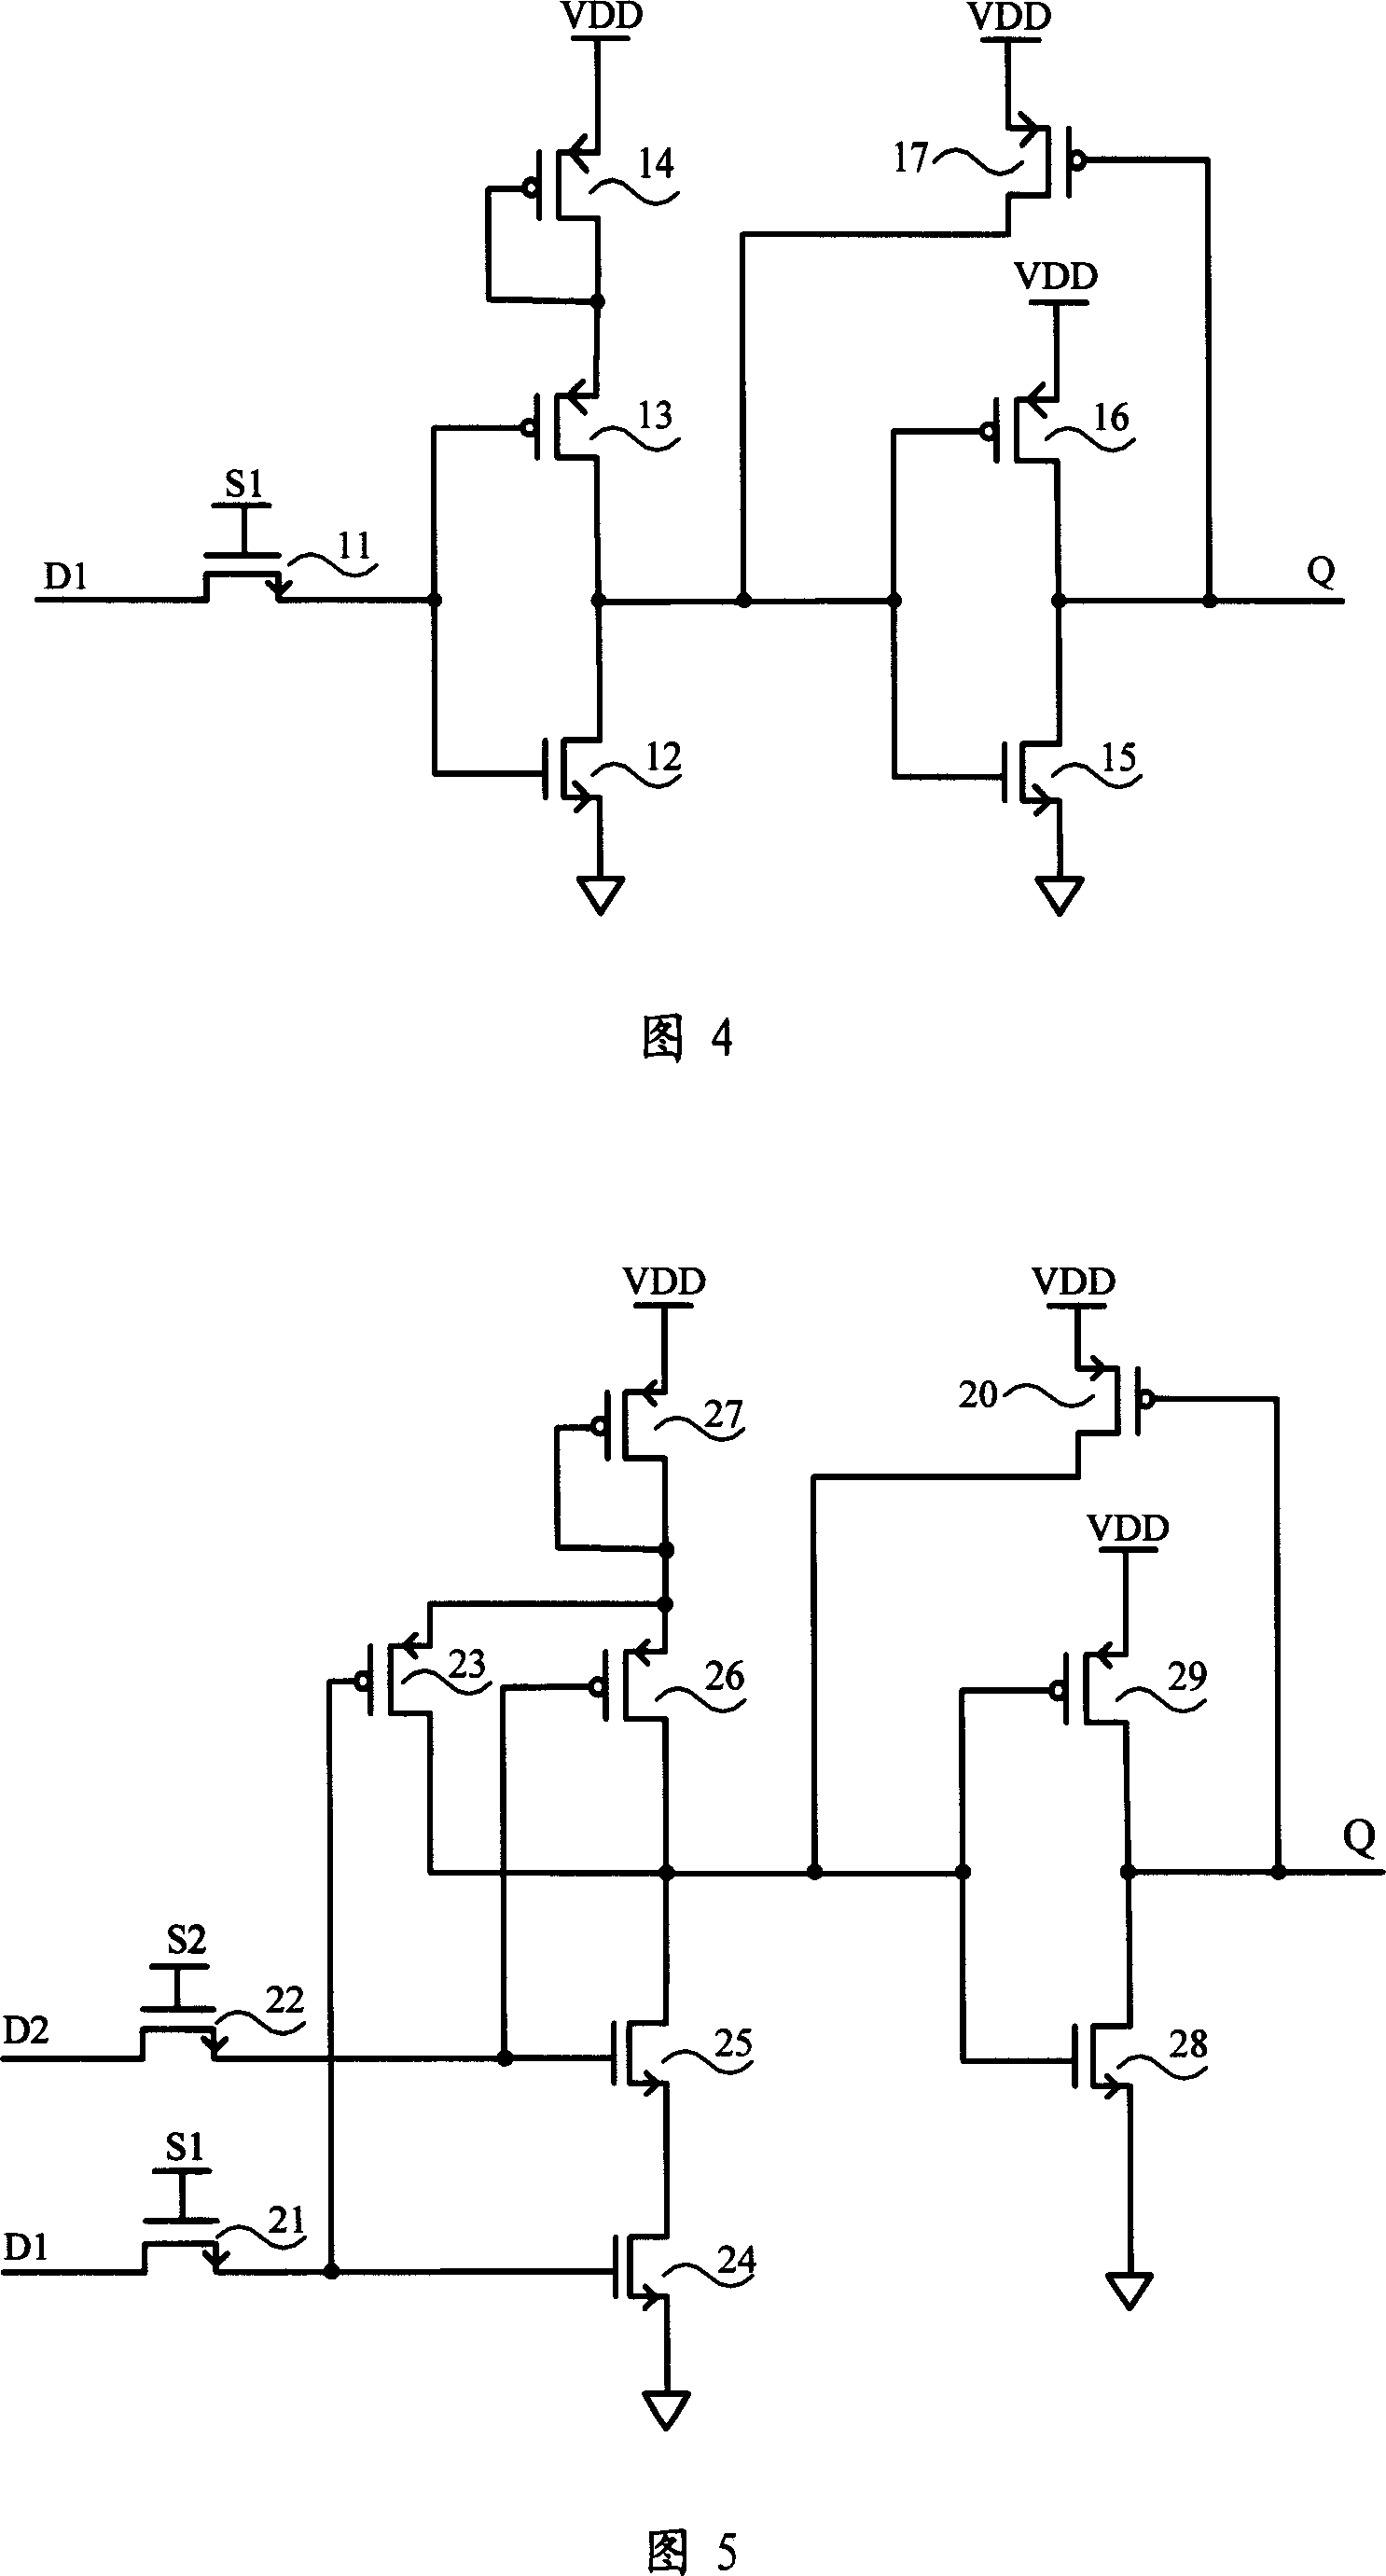 Circuit capable of eliminating NMOS single tube transmission to form static short circuit current